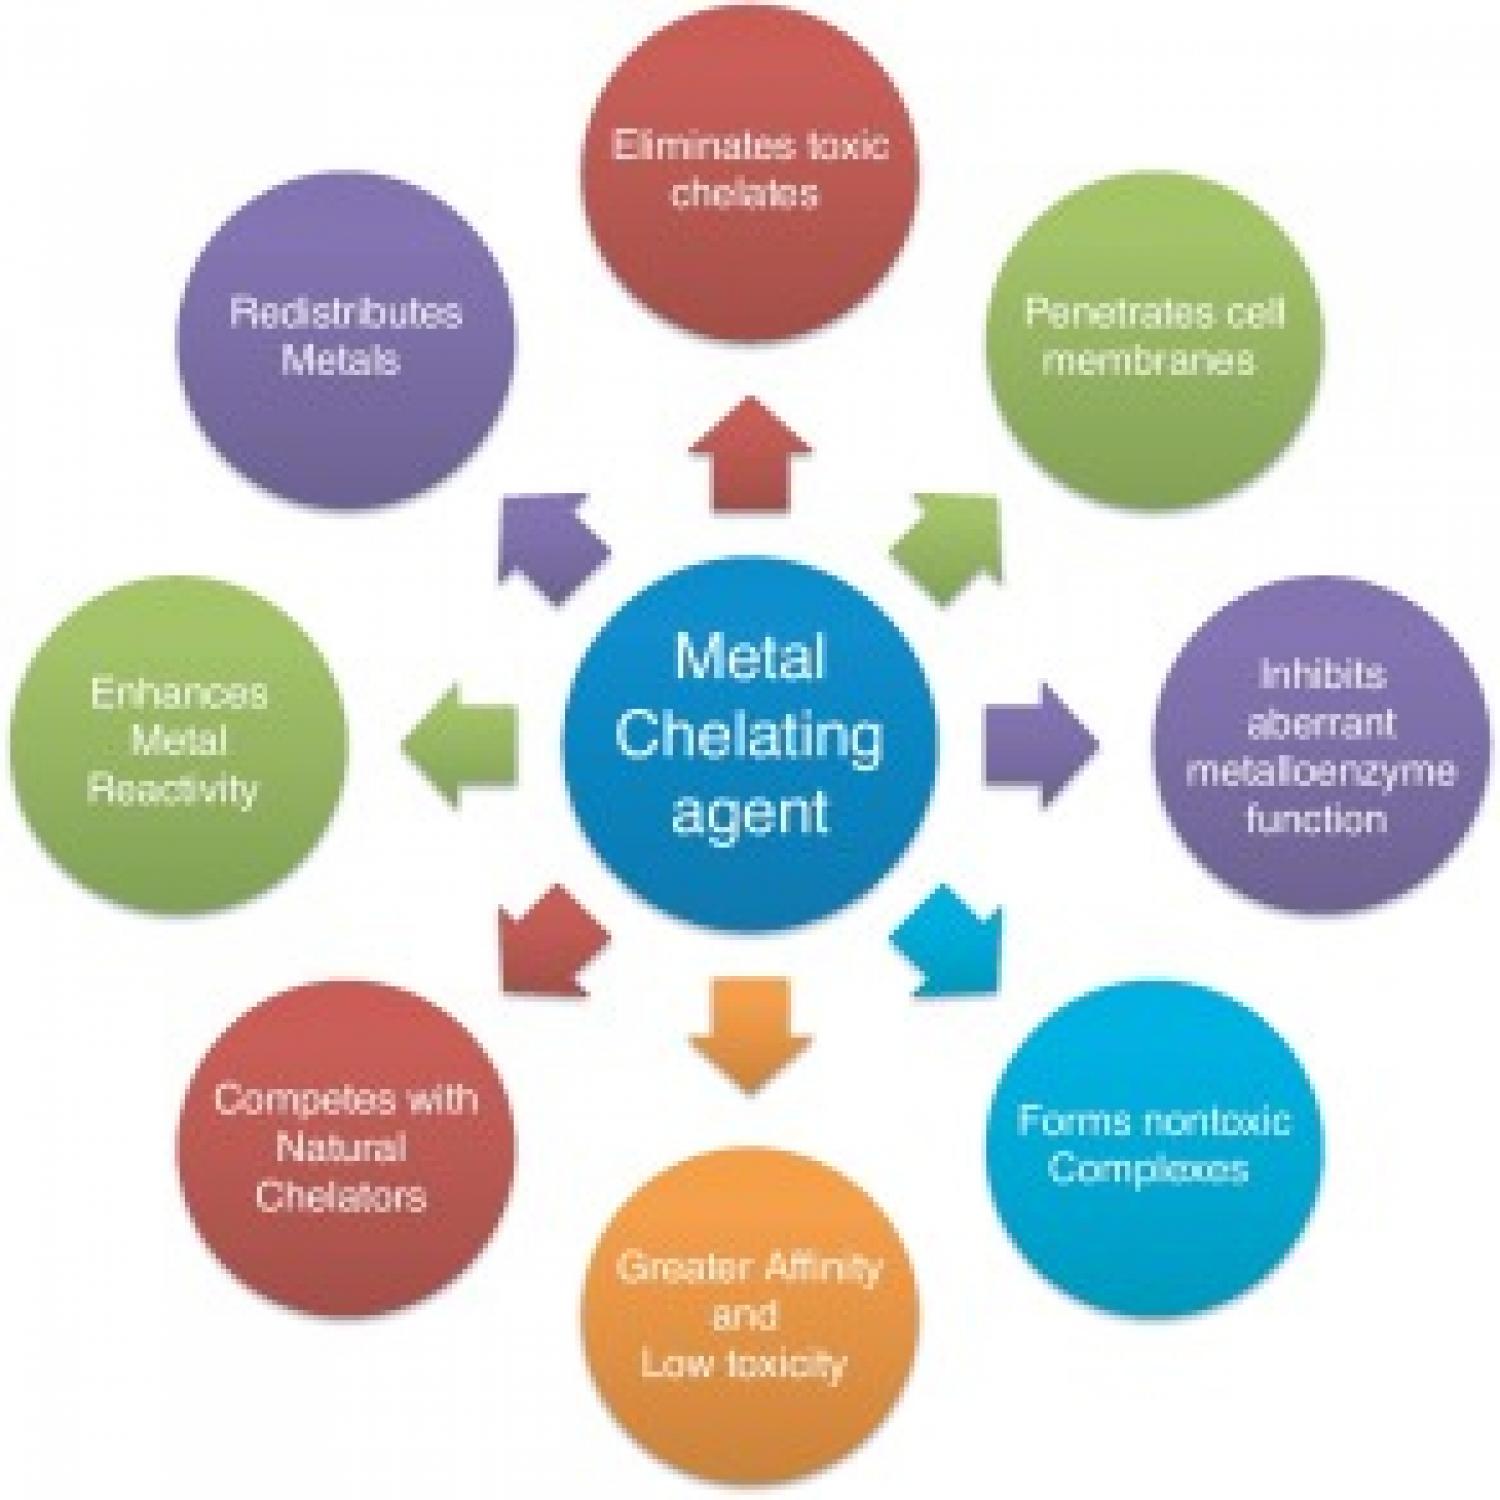 Schematic representations of the properties and functions of metal chelating agents.